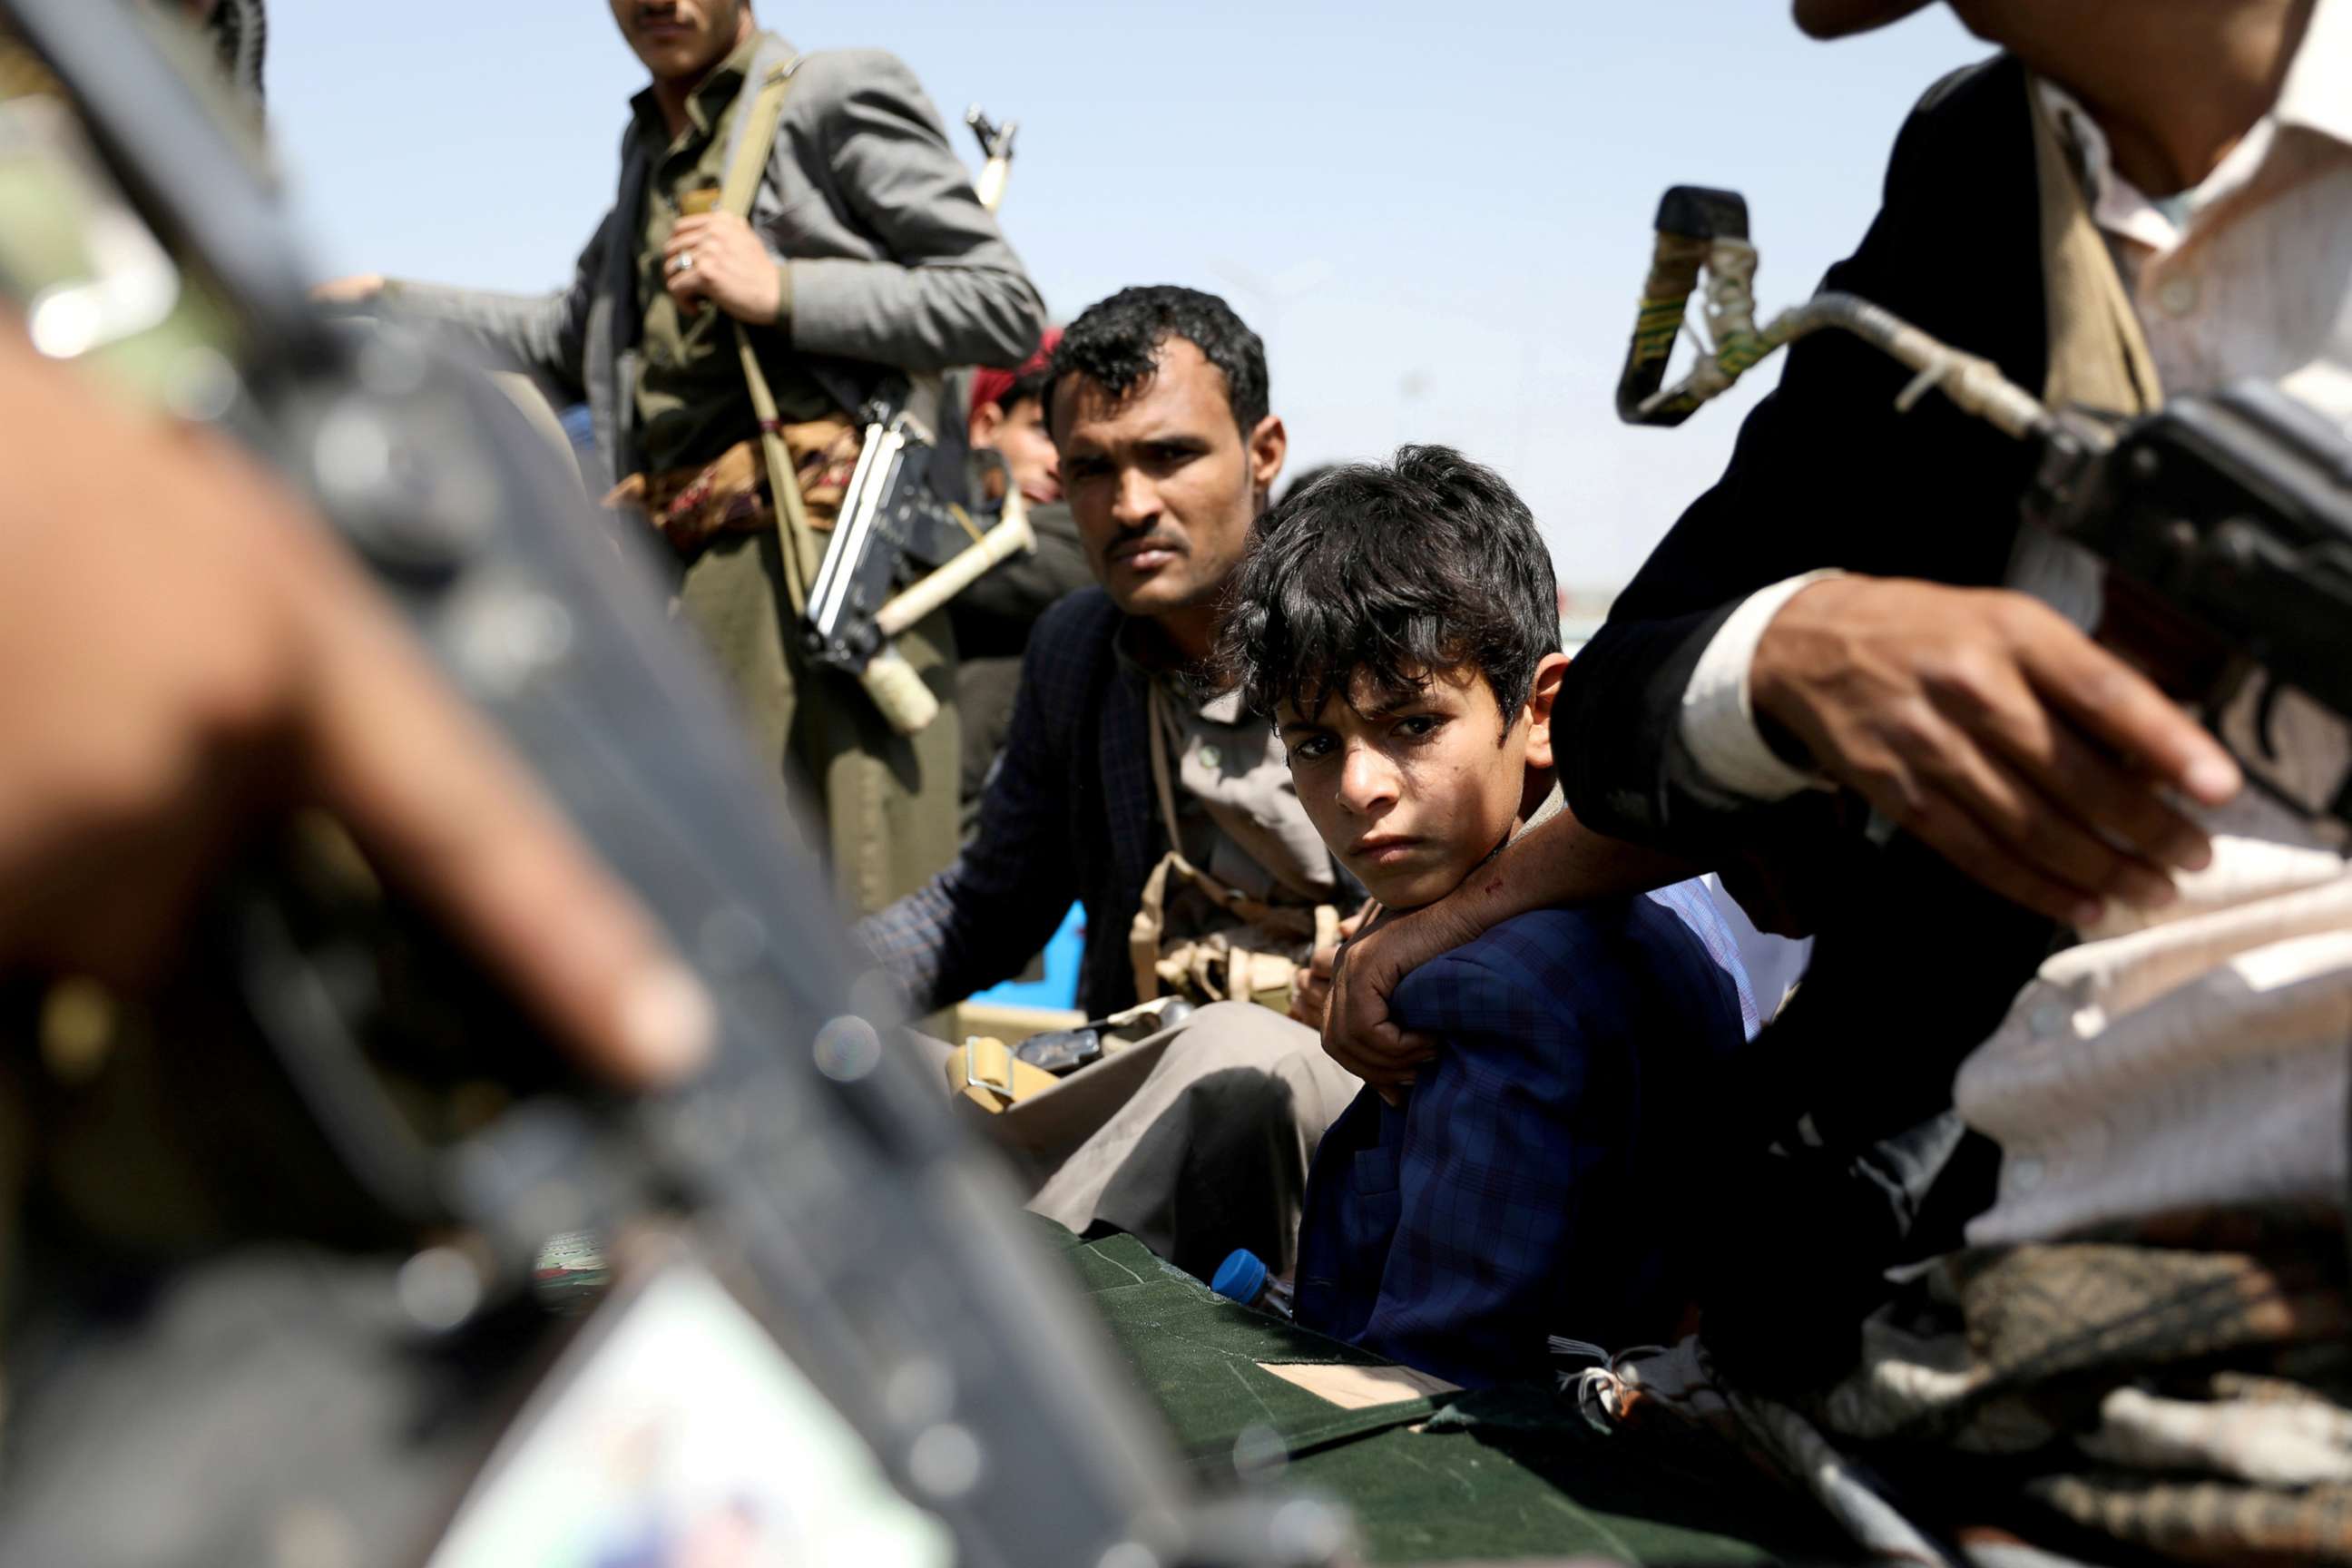 PHOTO: A boy rides with Houthi followers on the back of a patrol truck during the funeral of Houthi fighters killed during recent battles against government forces, in Sanaa, Yemen, Sept. 22, 2020. 